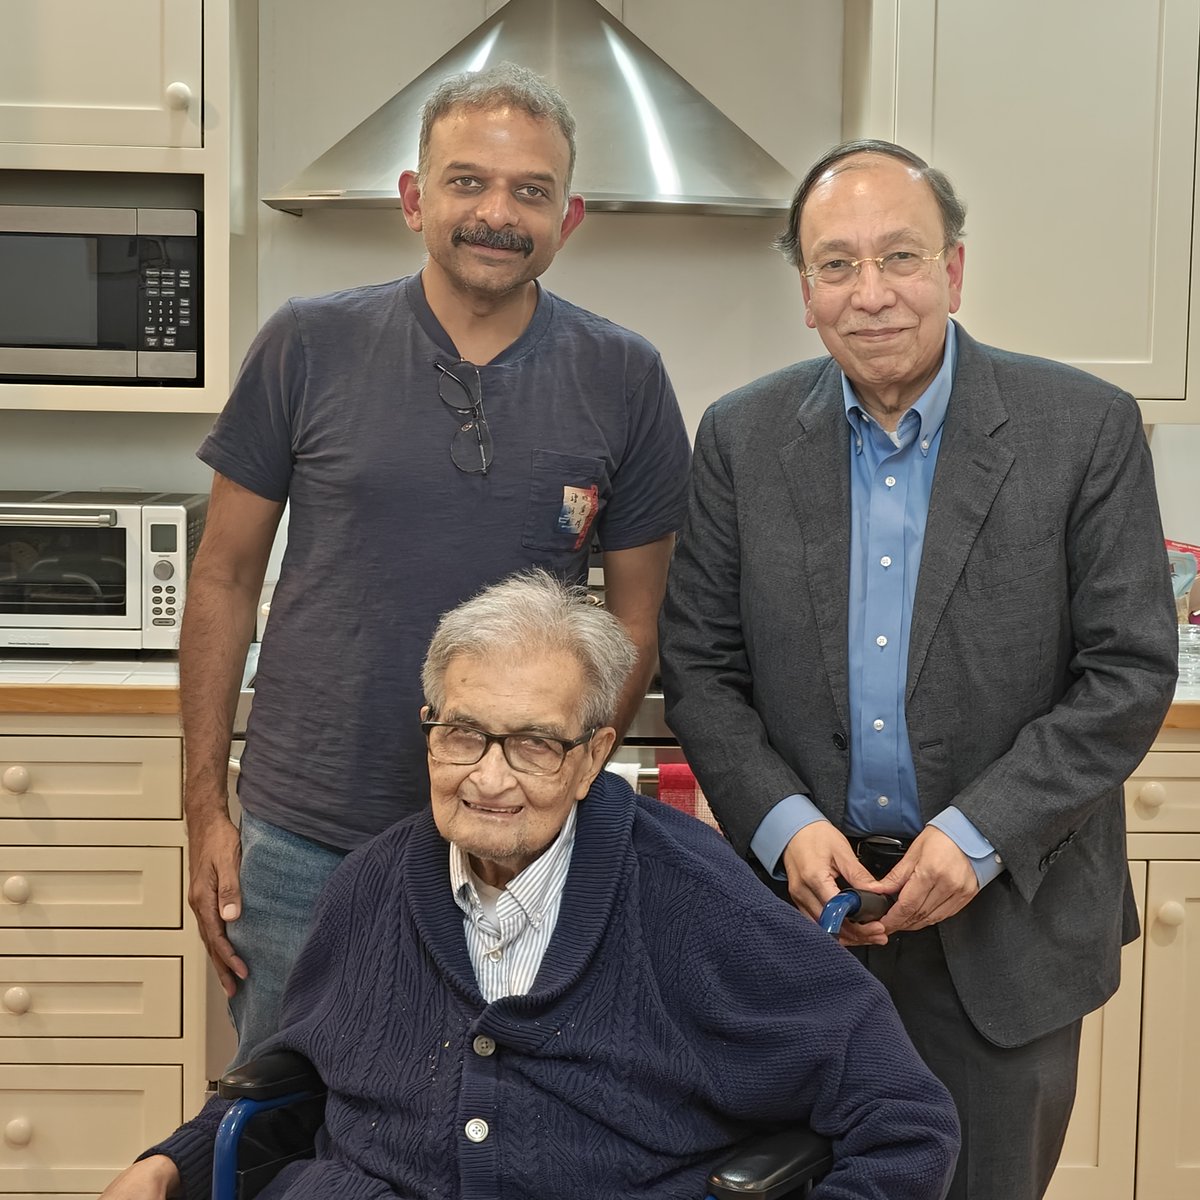 A visit to Cambridge (Mass) has always included an evening with Amartya-babu. It was wonderful to spend time with him and the ever illuminating @BoseSugata . In the times we live in, when compassion seems to have gone into hiding, Amartya-babu reminds us of that simple quality!